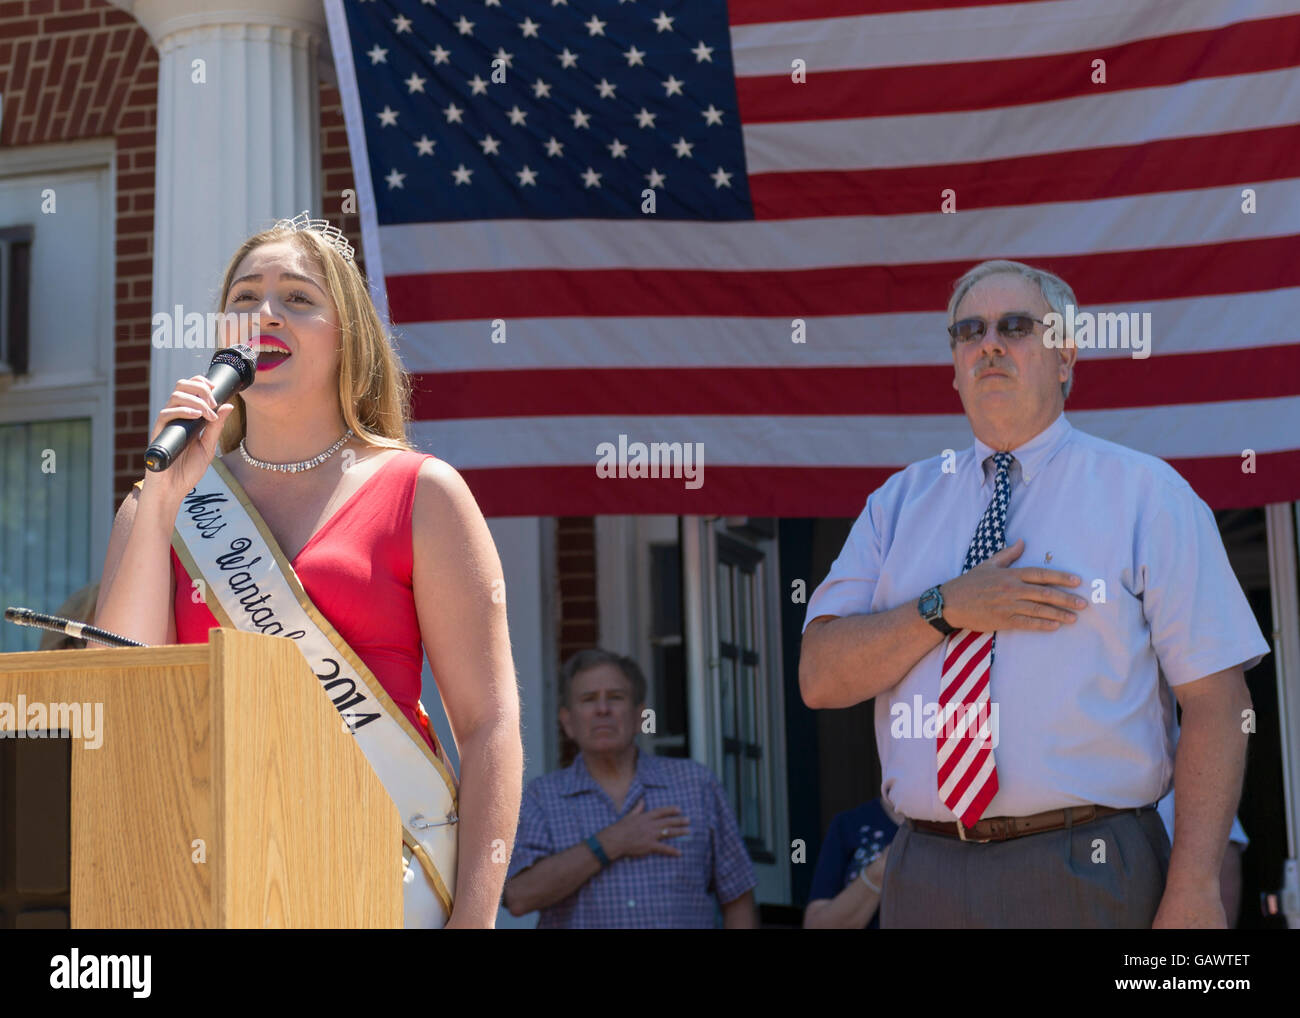 Wantagh, New York, USA. July 4, 2016.  KAYLA KNIGHT, Miss Wantagh 2014, sings God Bless America, with Hon. CHRISTOPHER QUINN standing to right of her and wearing red white and blue tie, at the start of the at the 60th Annual Miss Wantagh Pageant, an Independence Day tradition on Long Island. Judge Christopher Quinn is the Nassau County Supervising Judge of the County Court, and Acting Supreme Court Justice. Credit:  Ann E Parry/Alamy Live News Stock Photo